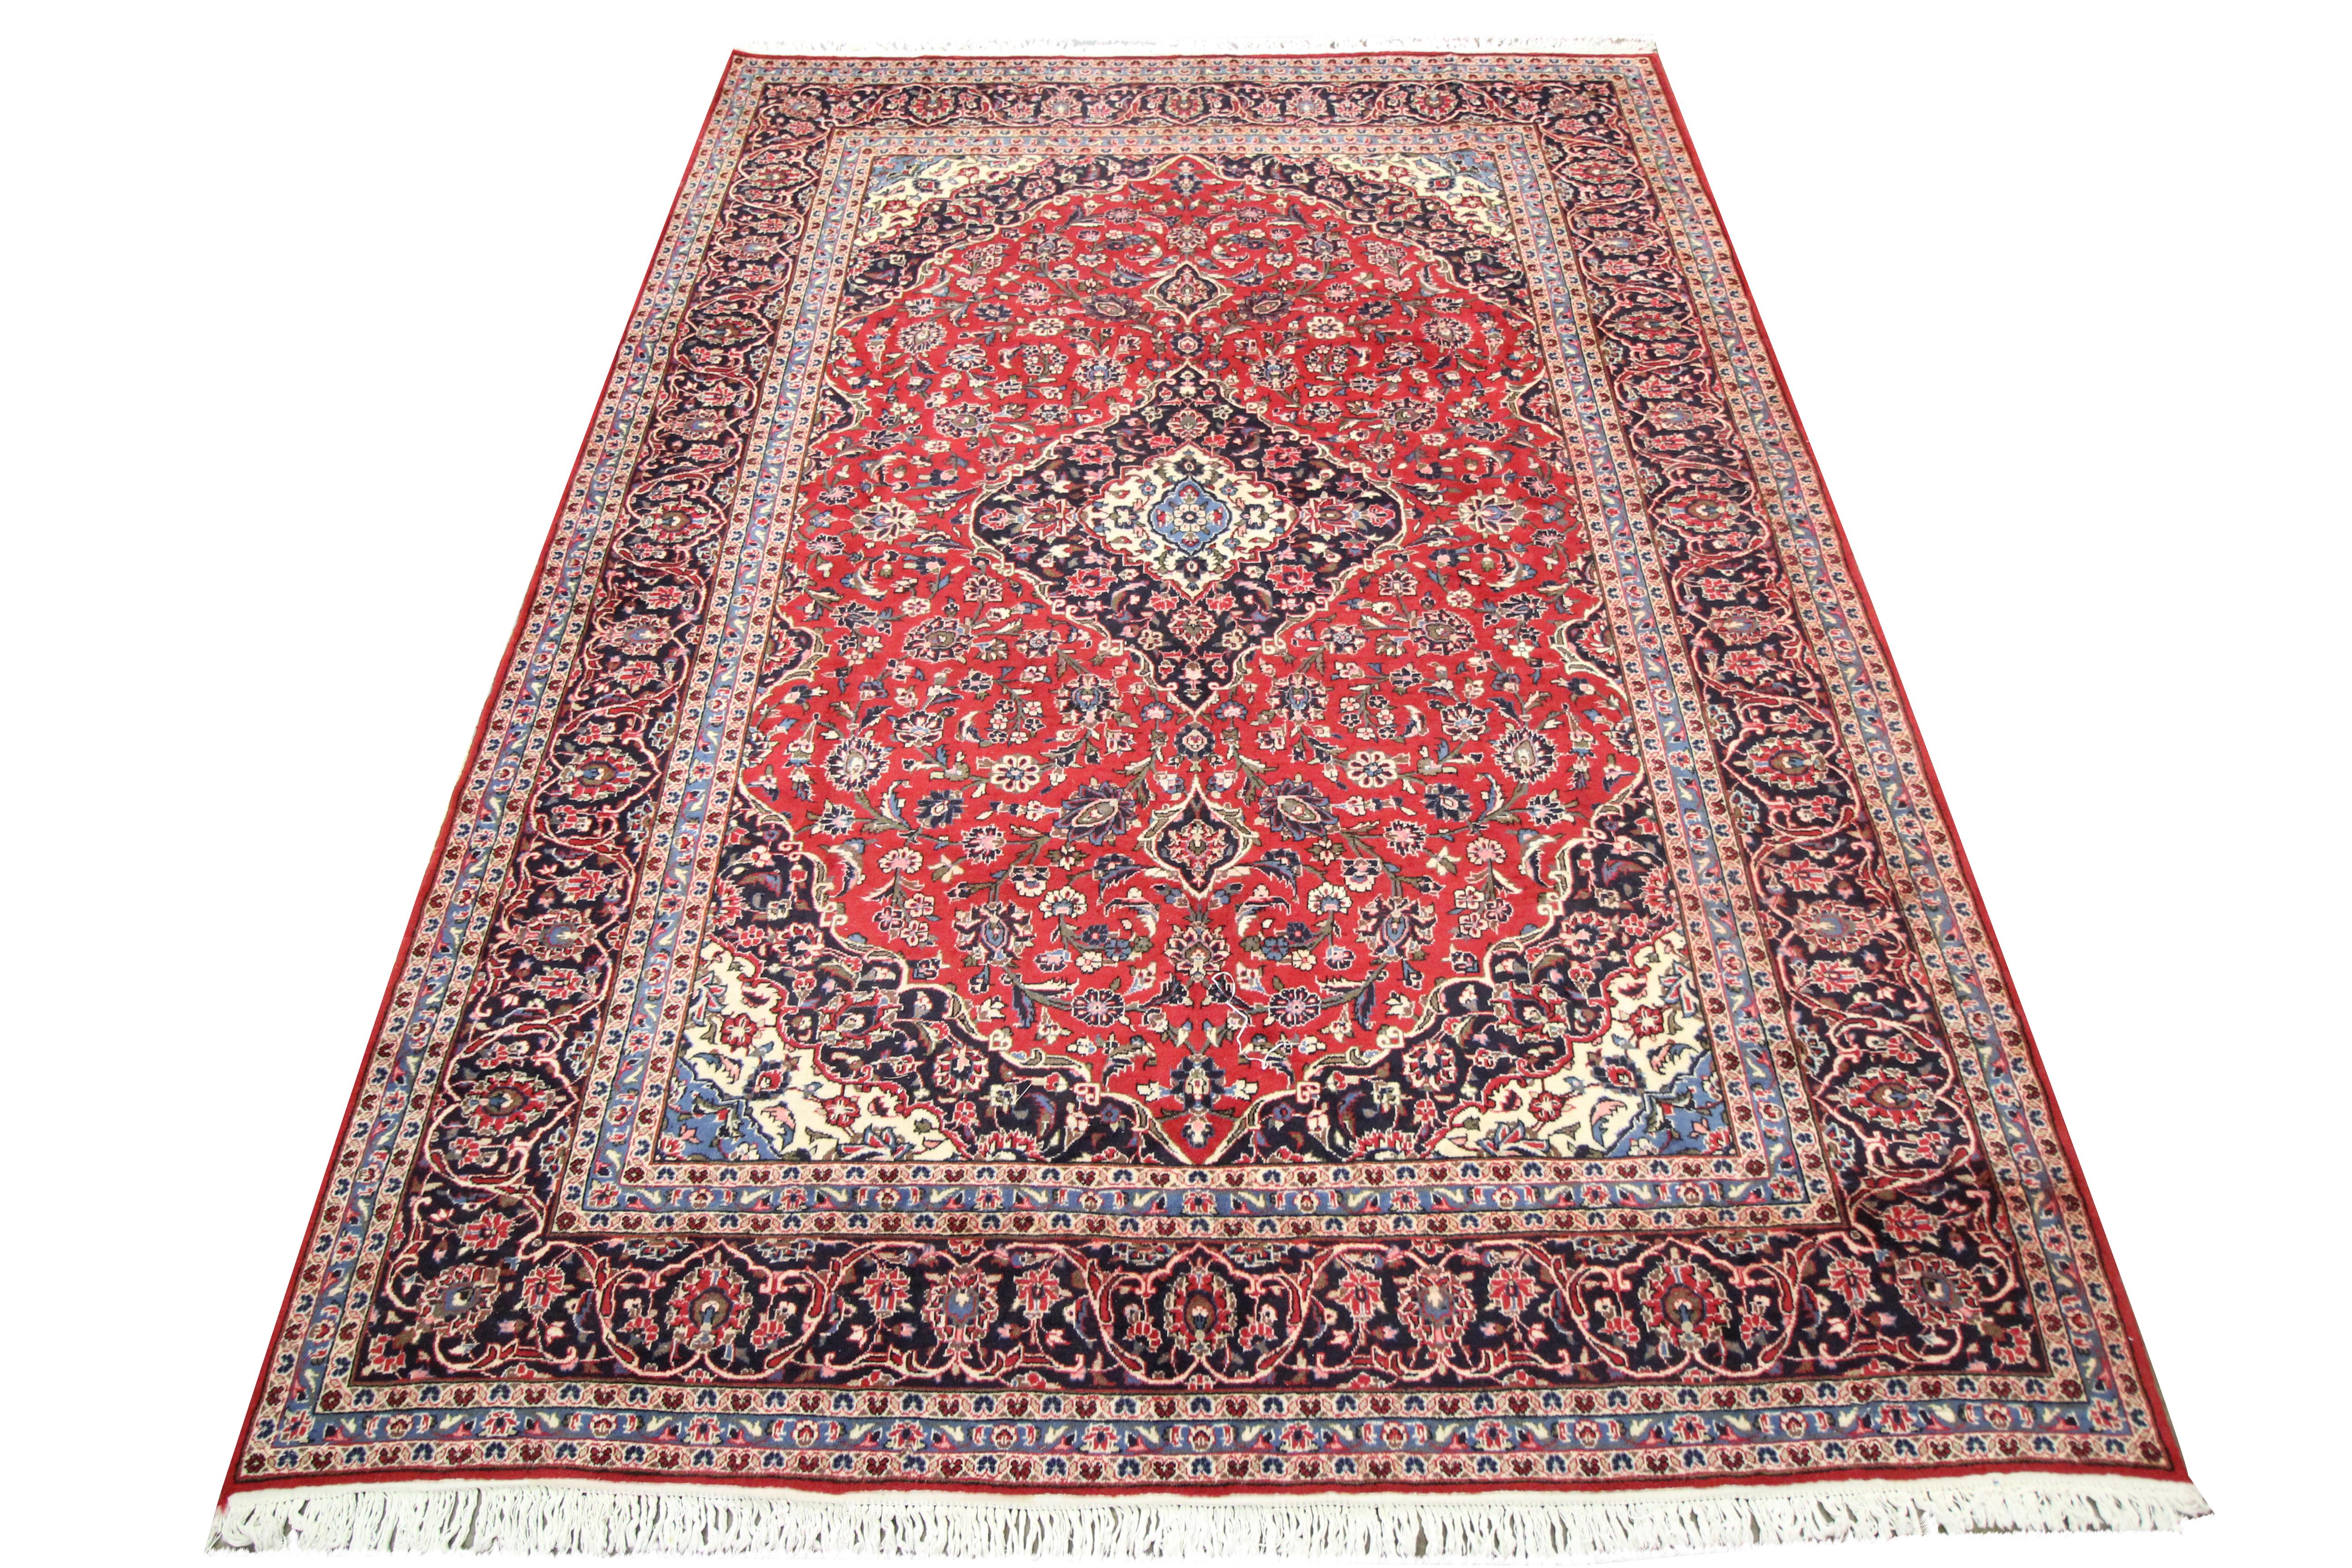 This traditional red wool area rug is a fantastic example of handwoven mid-20th century carpets. Featuring a rich red background and an array of accents including blue, beige and green that make up the highly decorative floral design. The colour